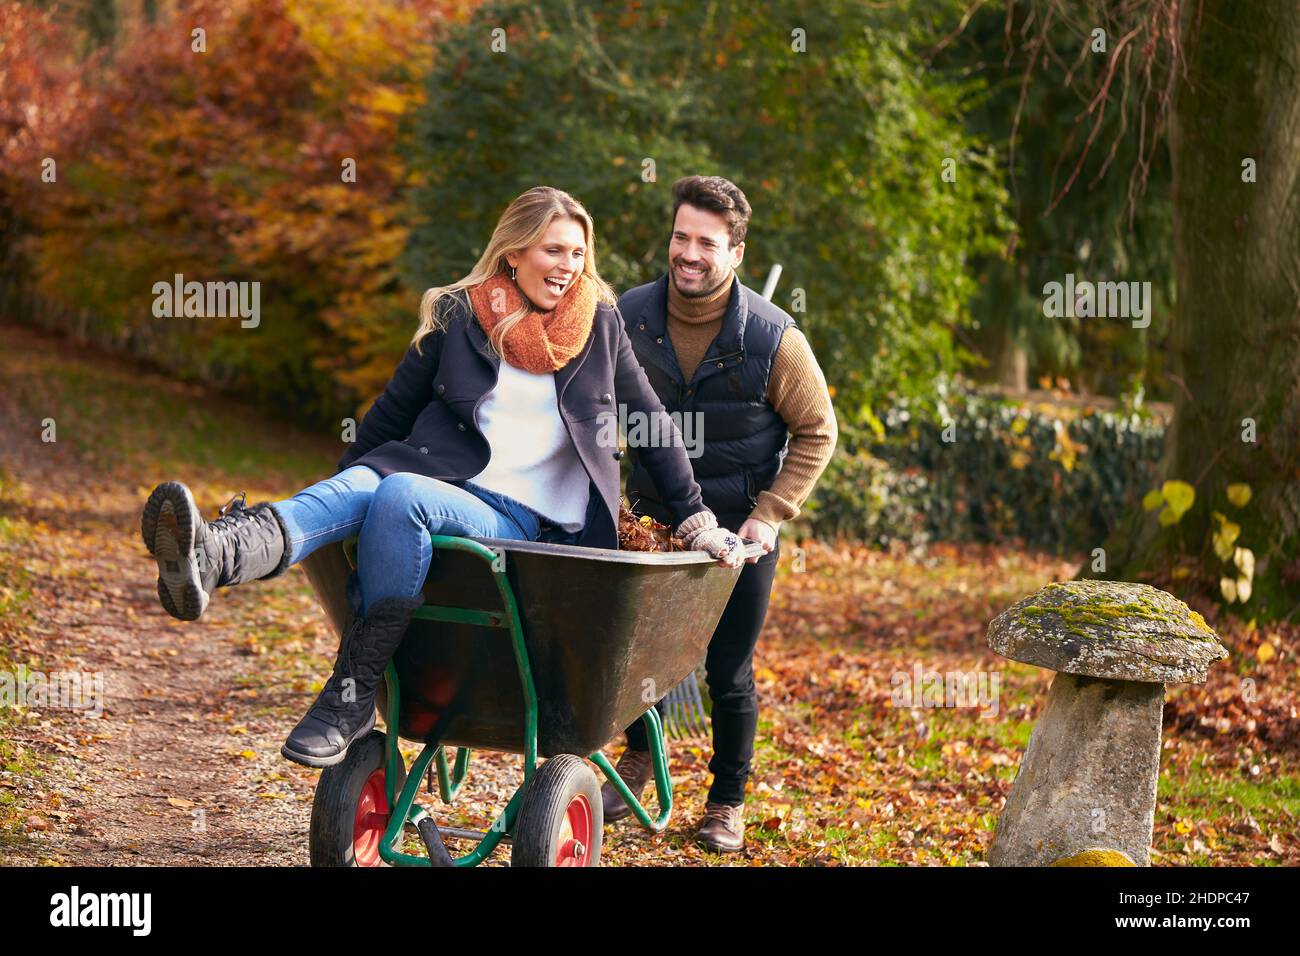 couple, autumn leaves, fun, gardening, pairs, leaf, funs, plant care, tending of plants Stock Photo